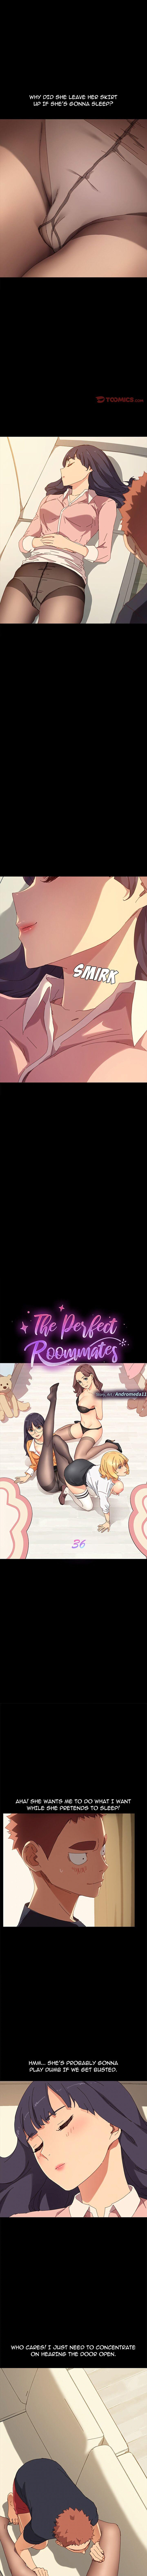 The Perfect Roommates 351